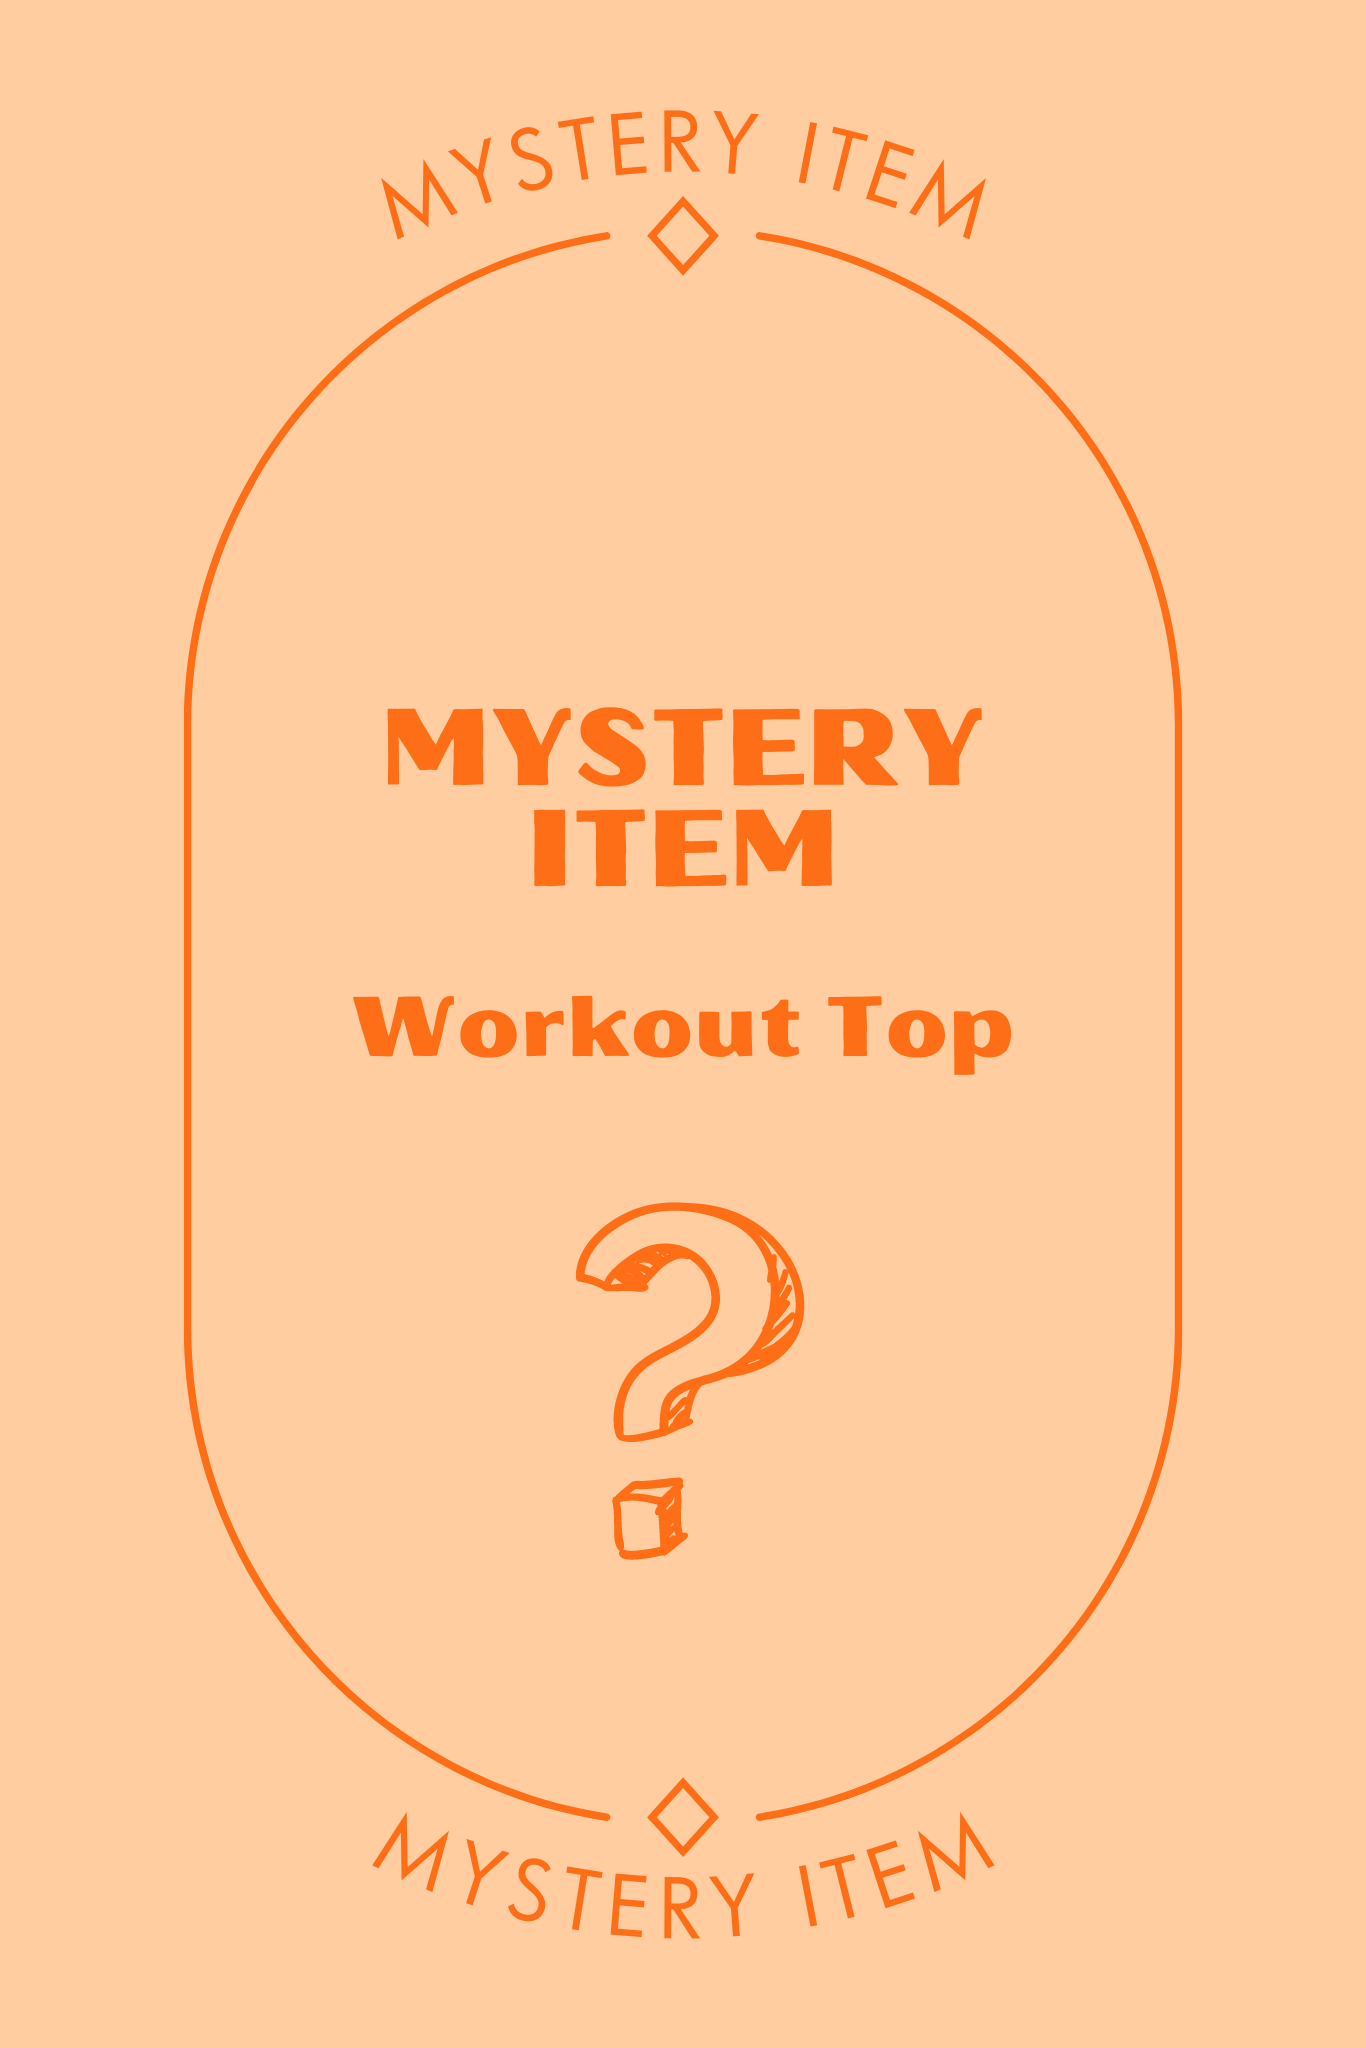 MYSTERY FORM WORKOUT TOP